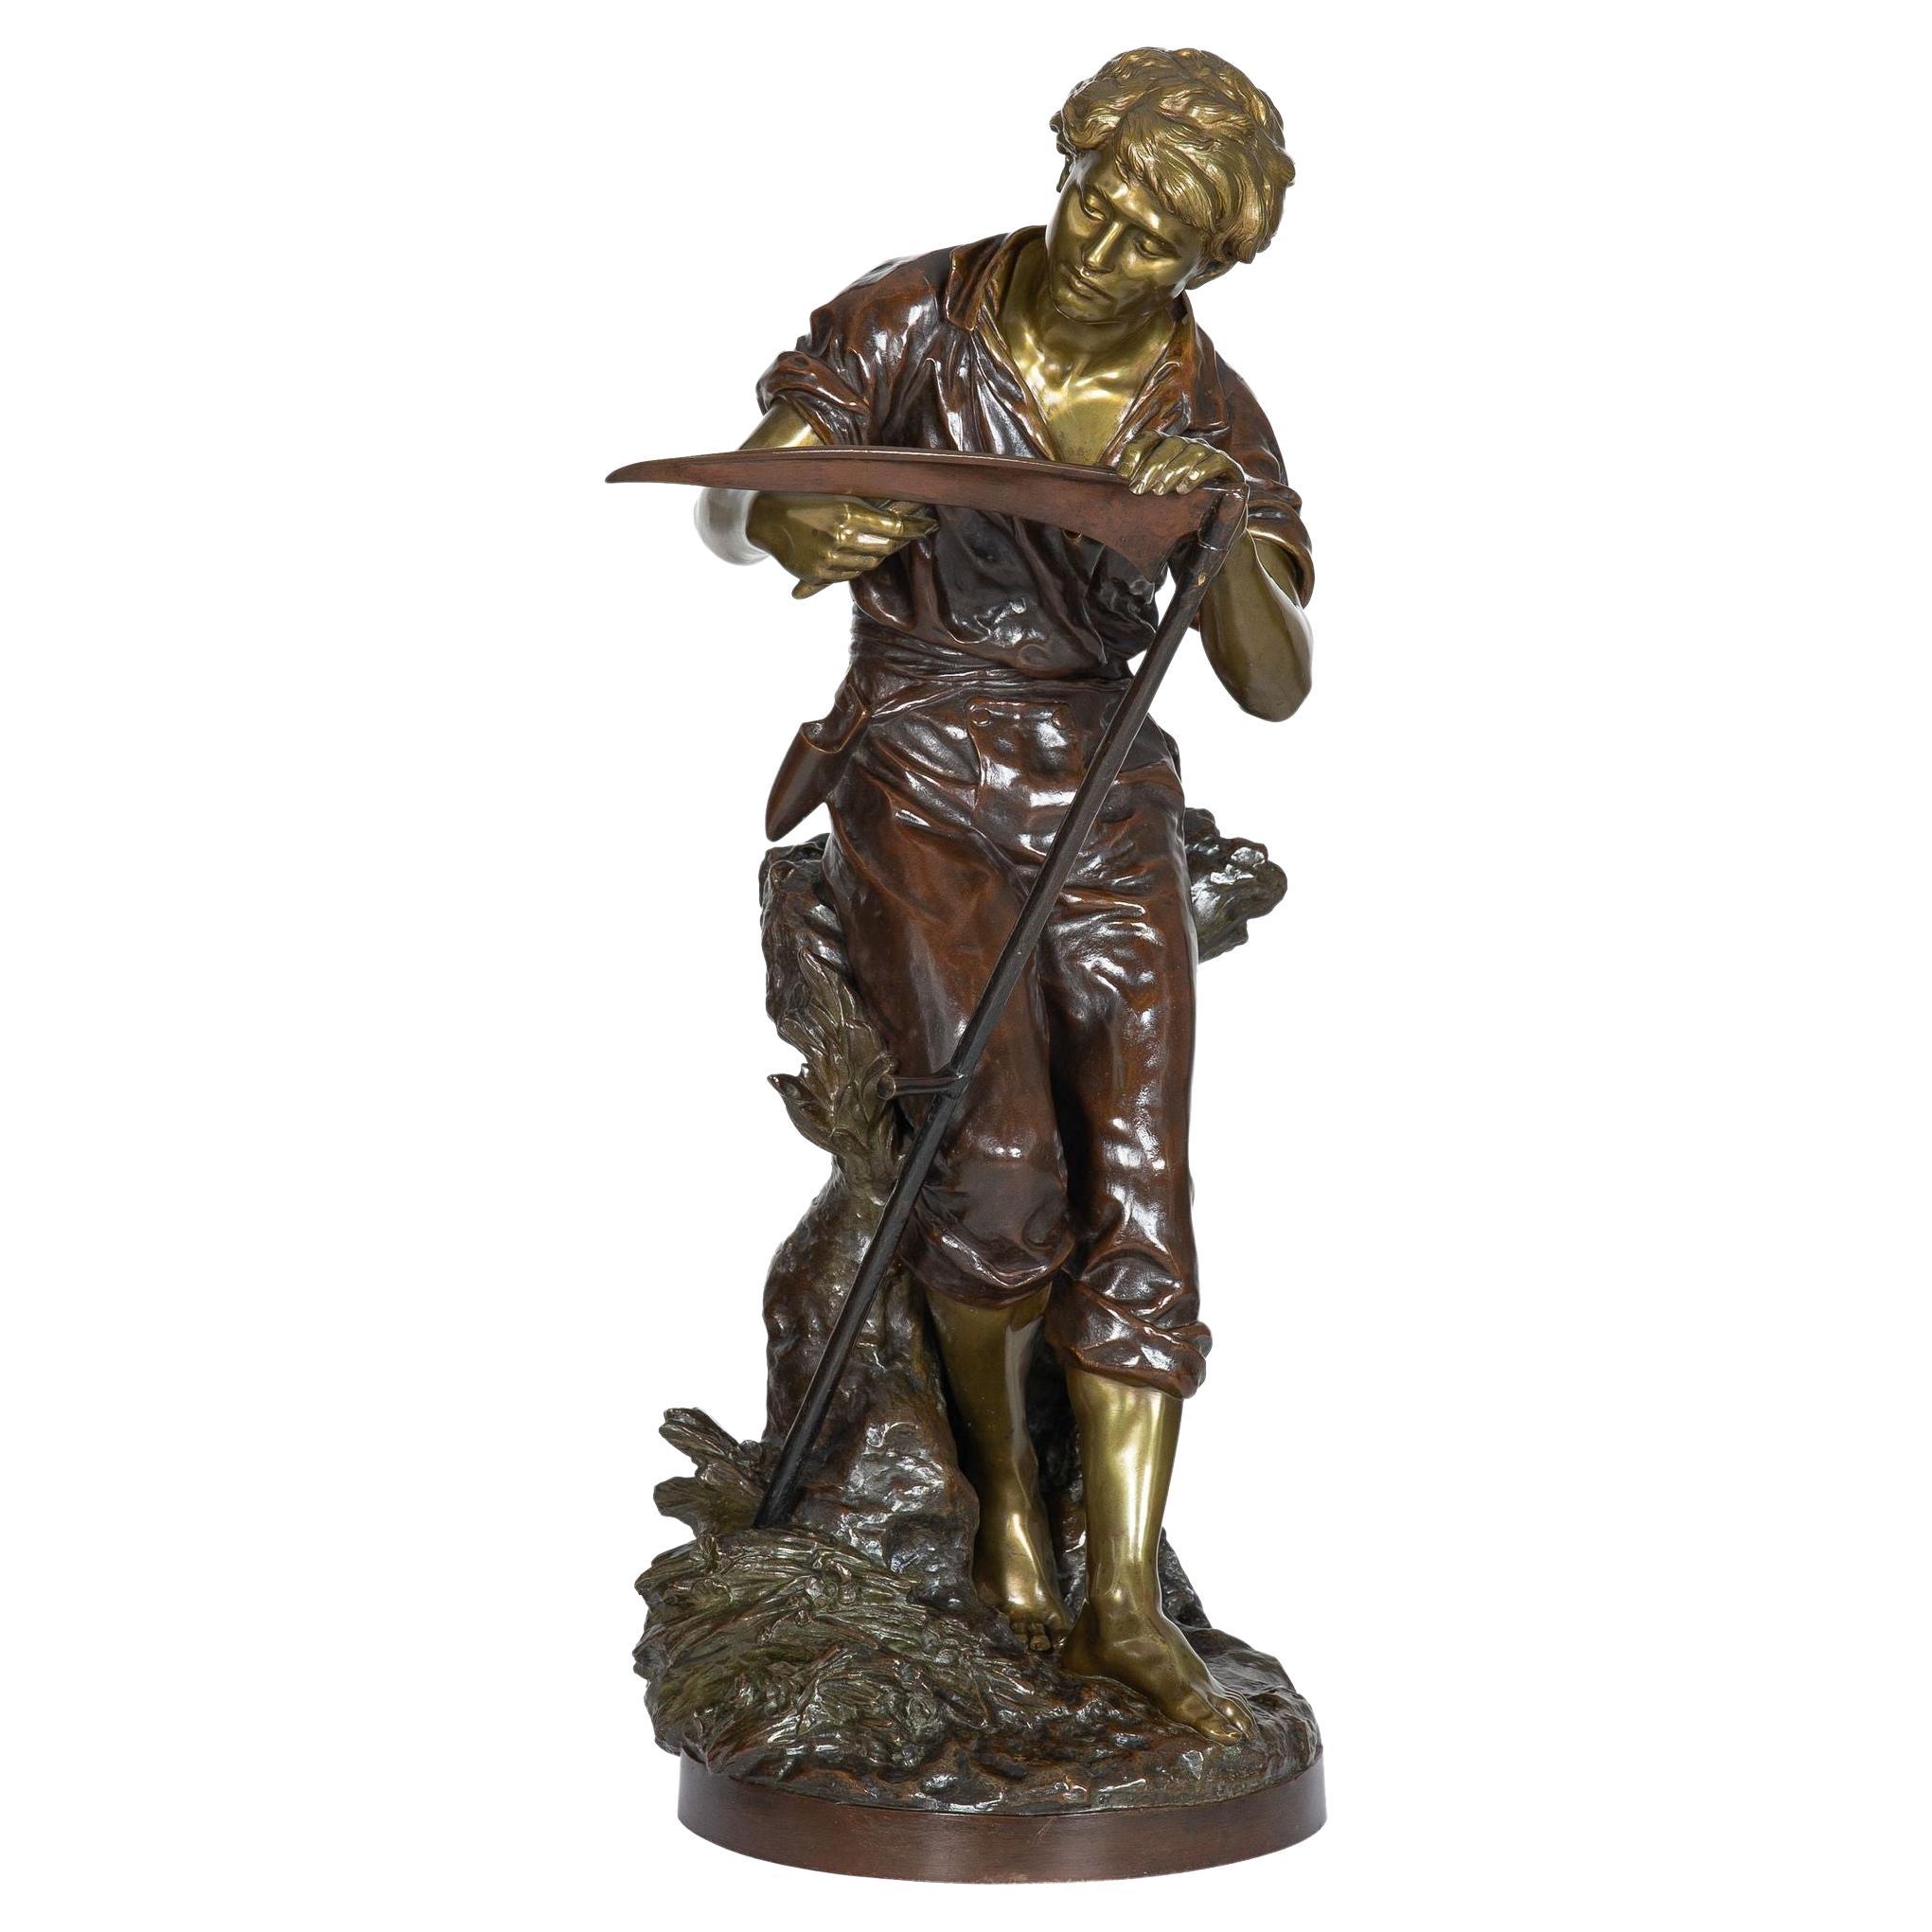 French Antique Bronze Sculpture of "Harvester" by Mathurin Moreau For Sale